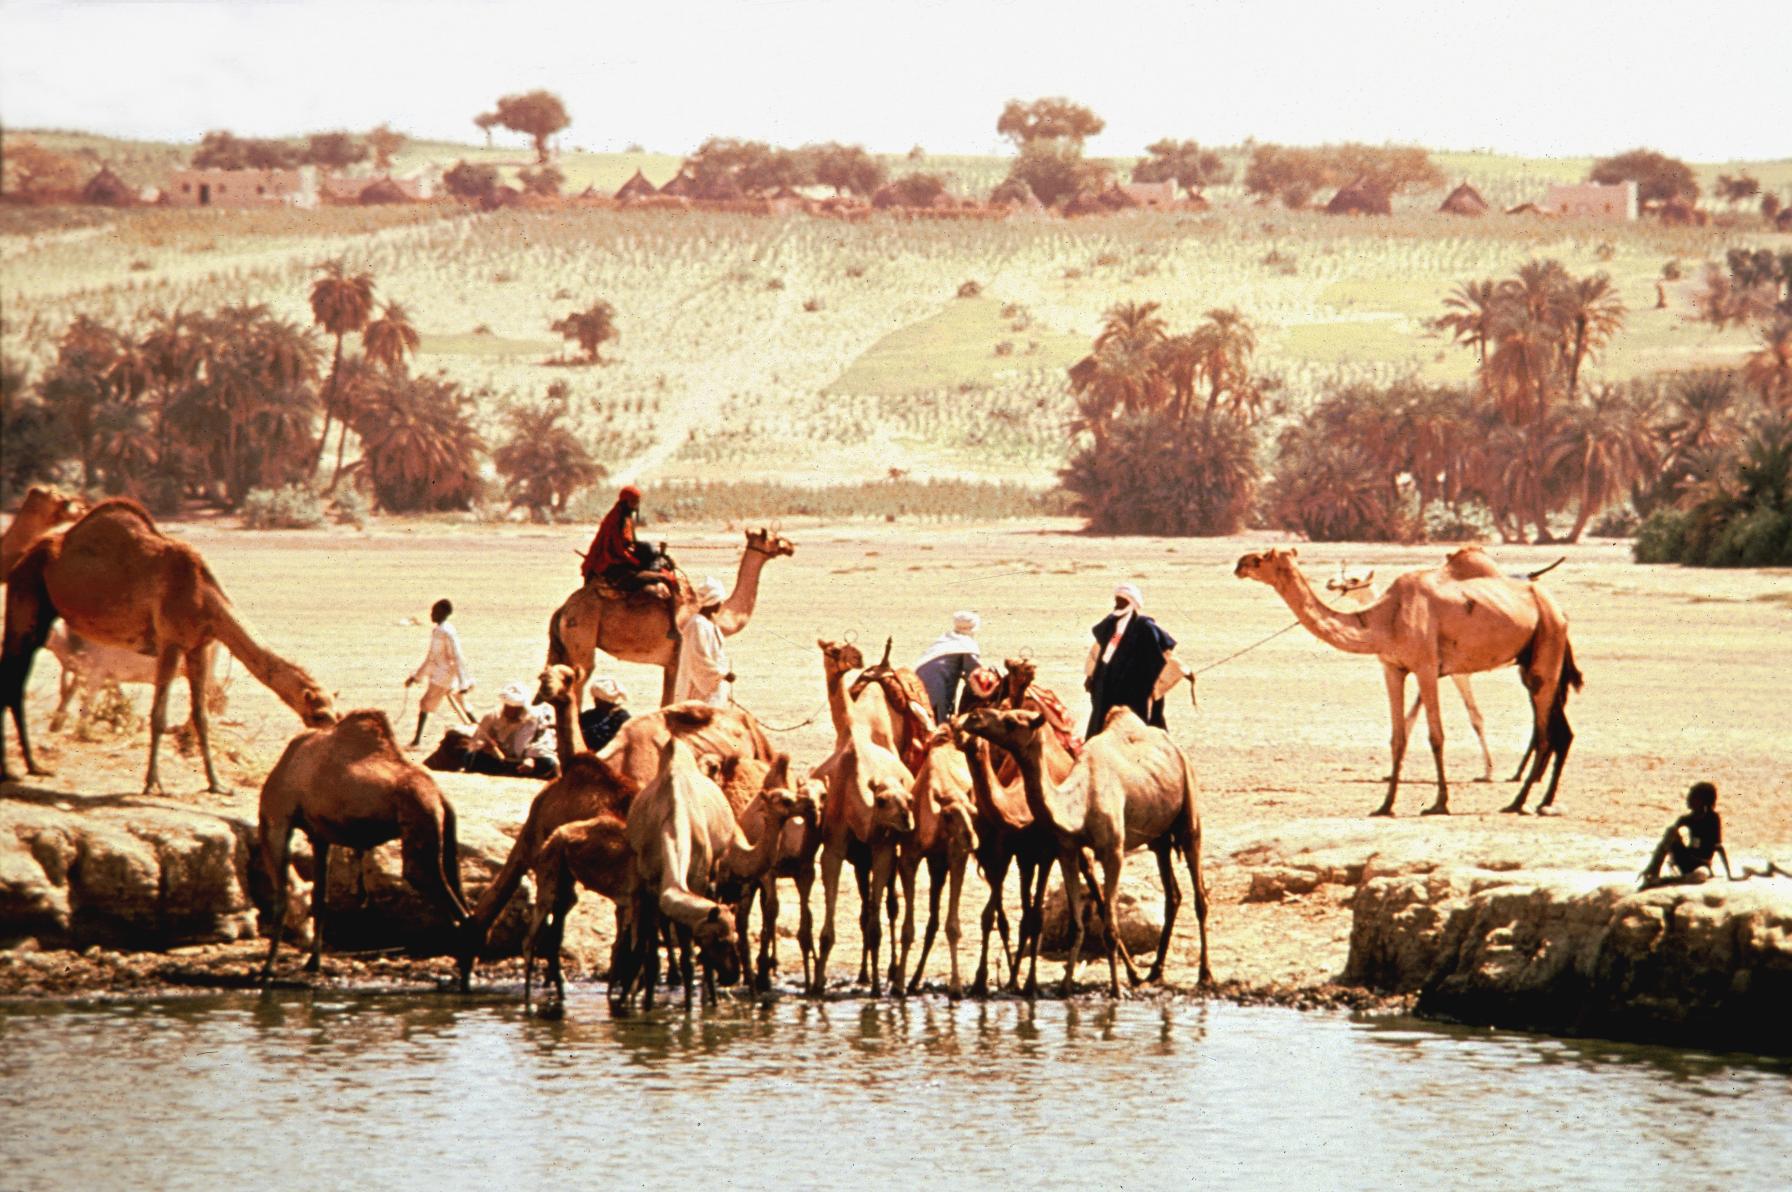 Camels at Water Hole